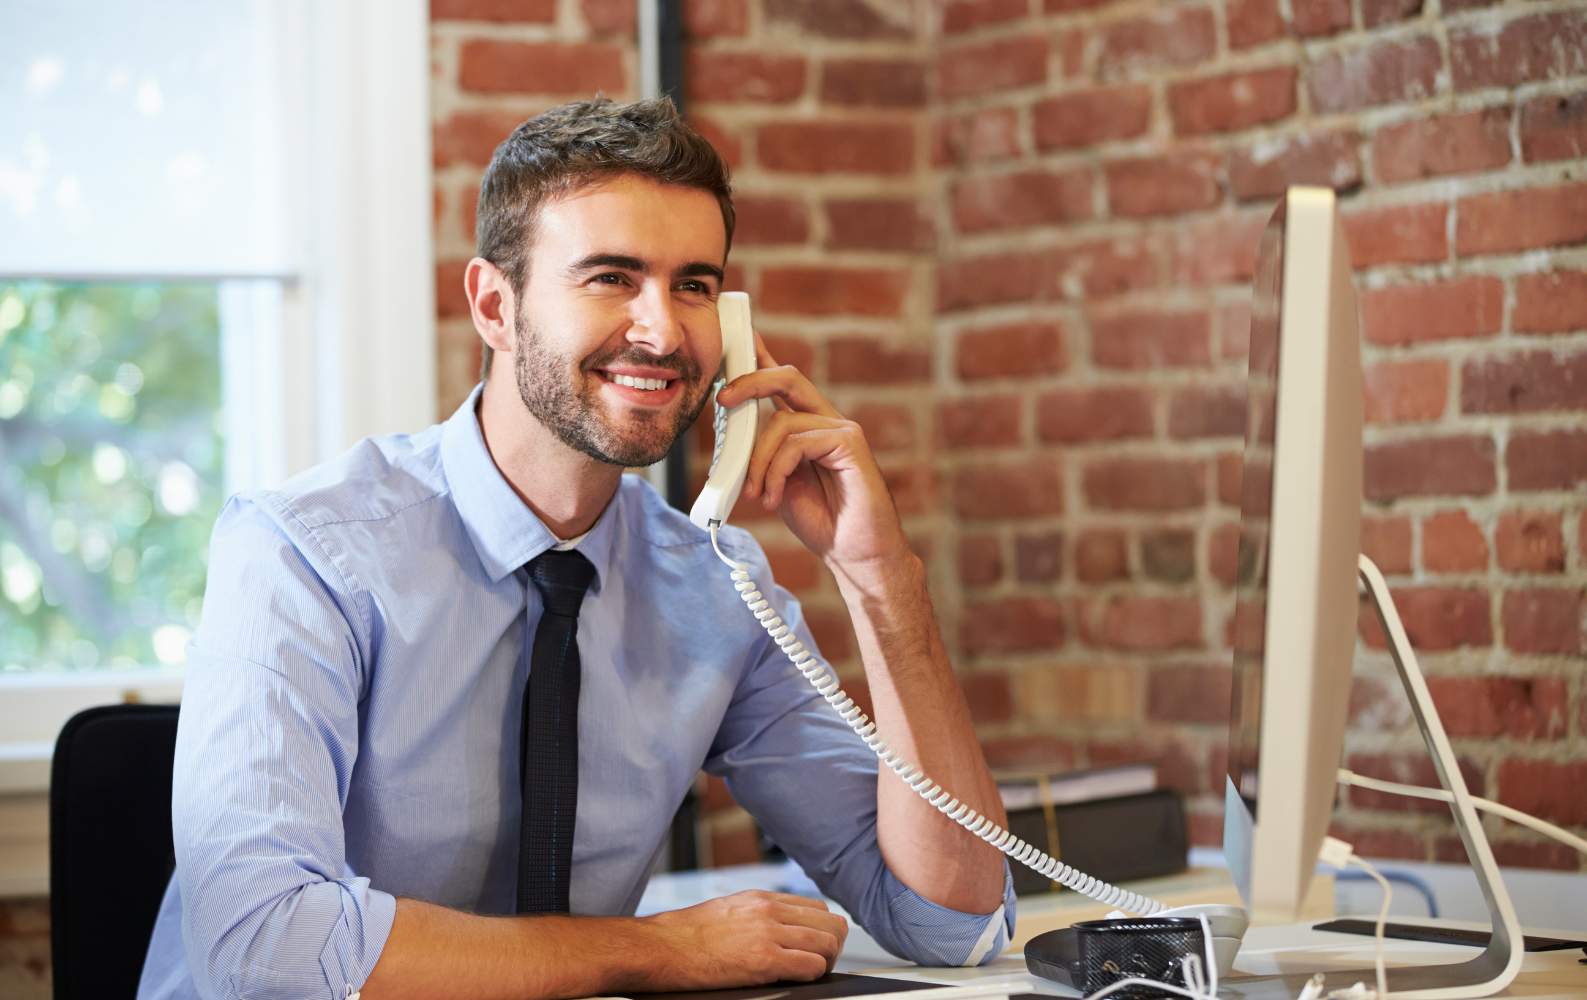 Man smiling on a call using ip phone